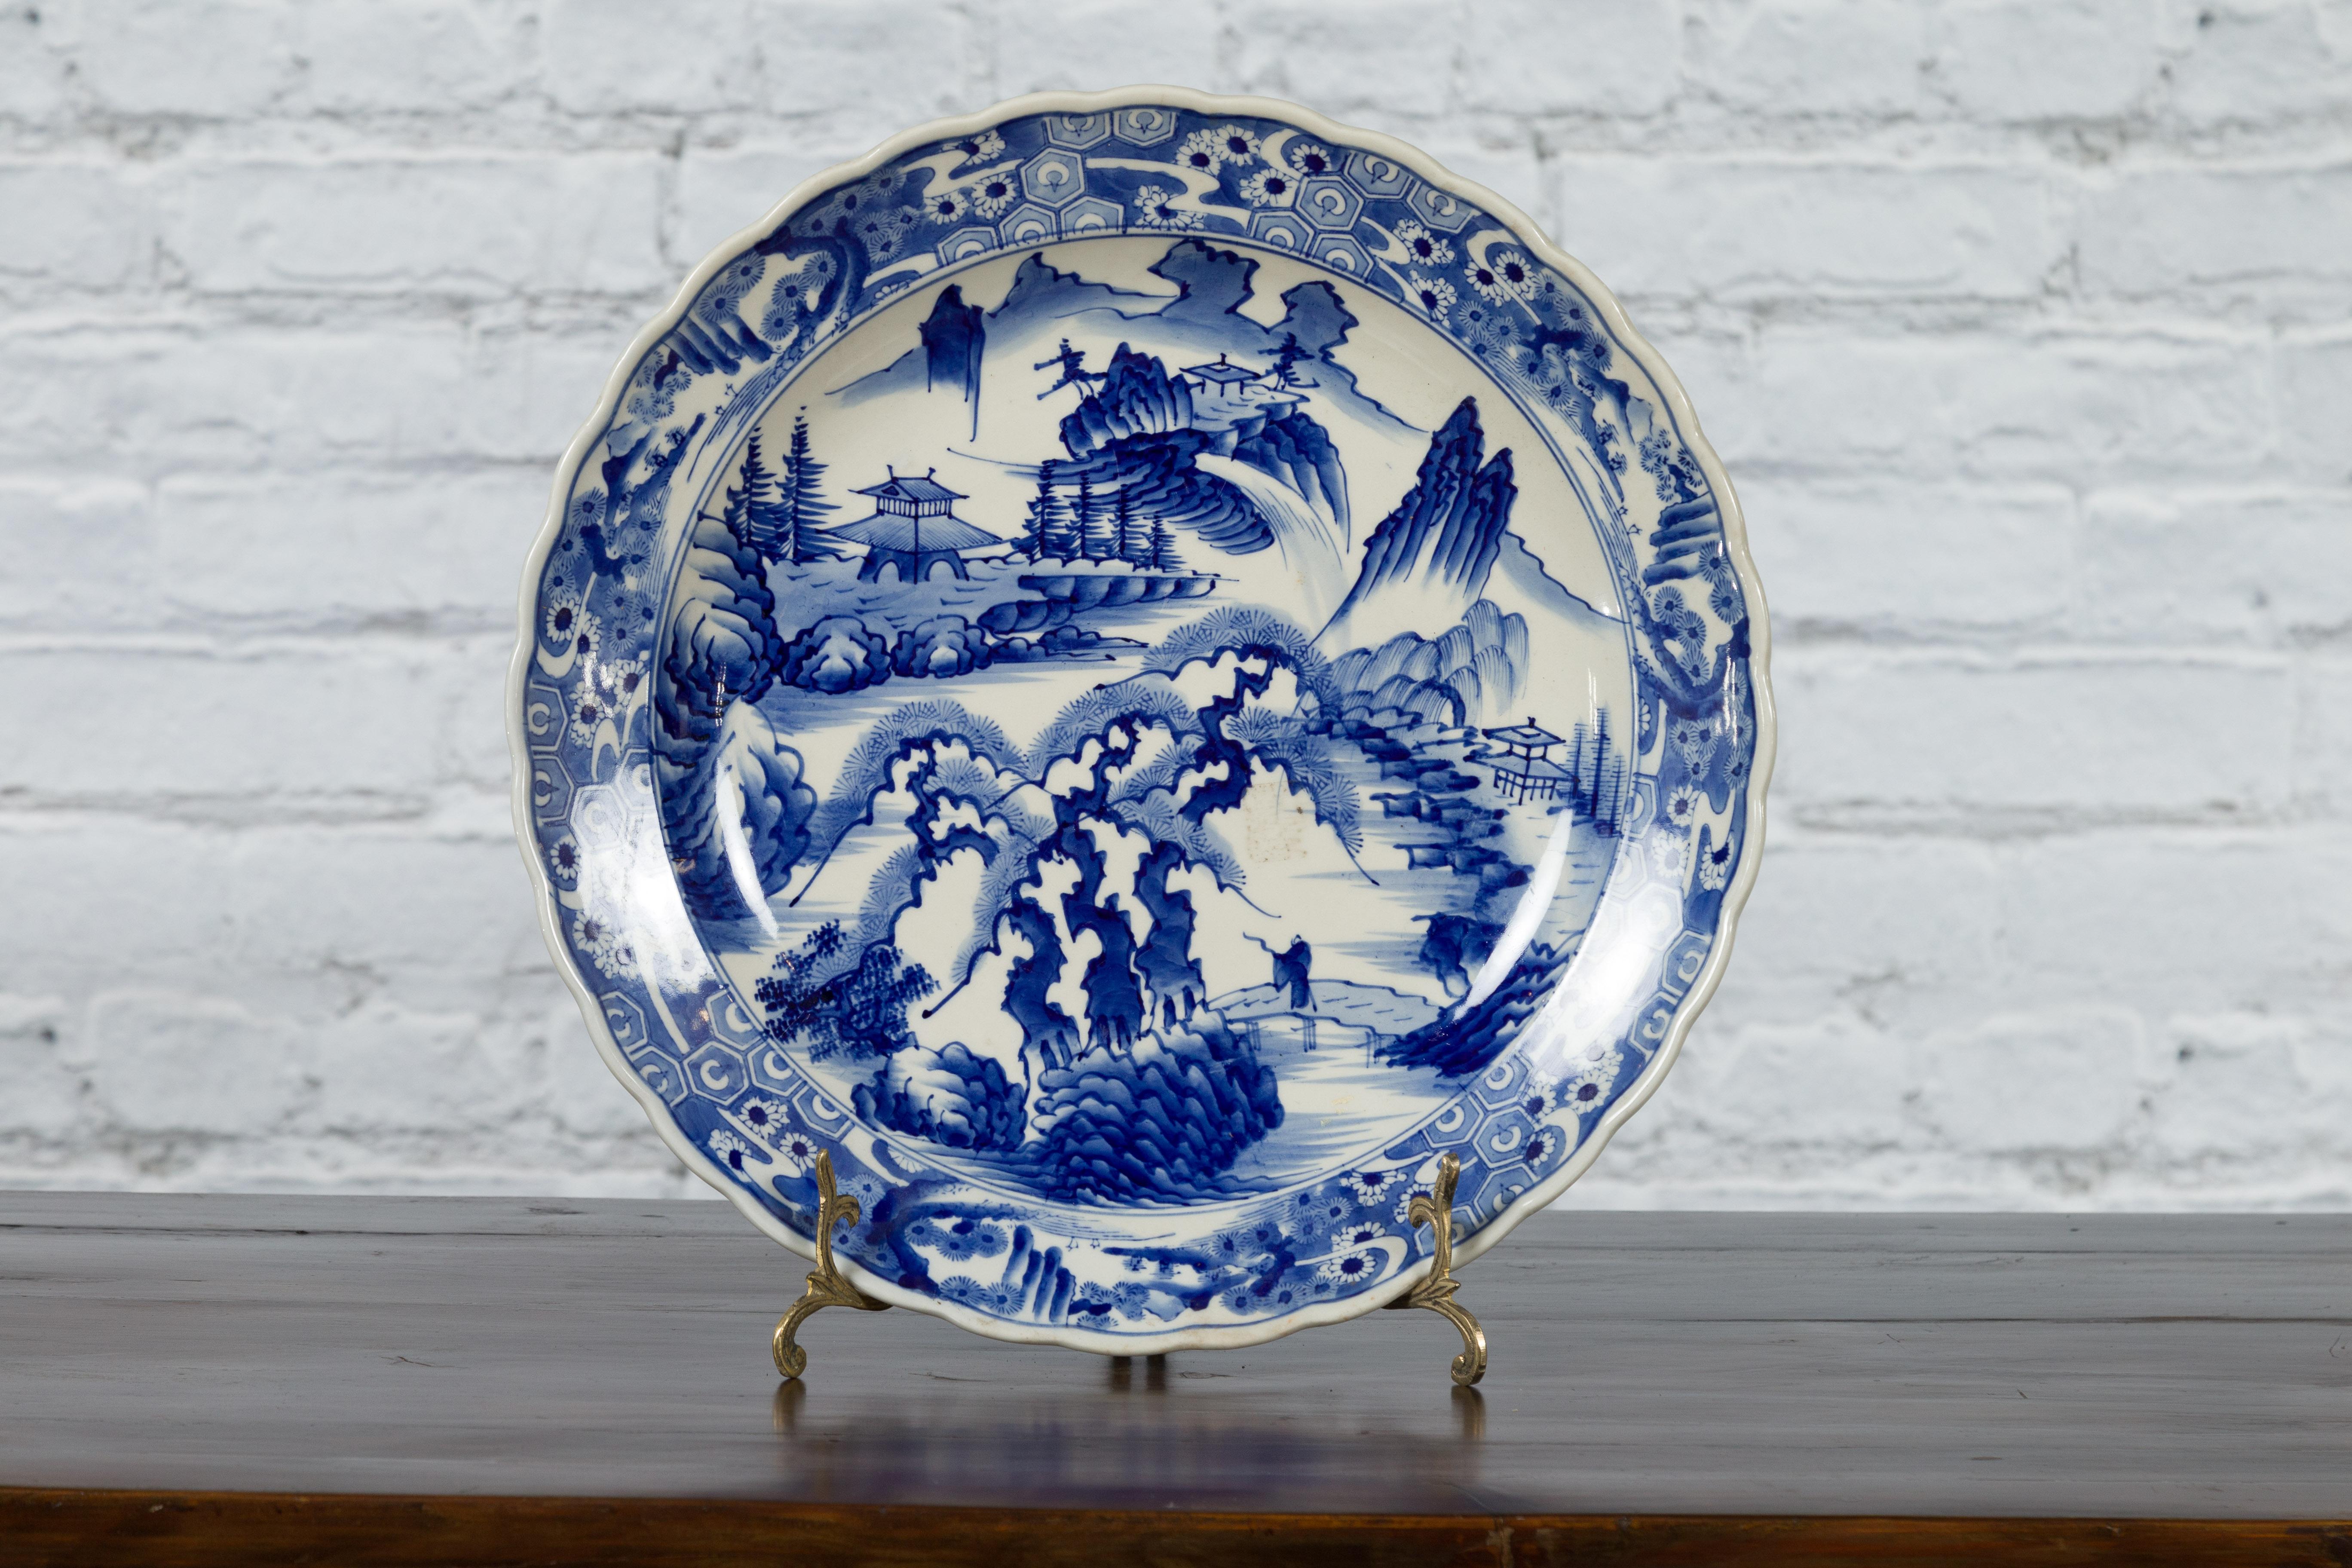 A Japanese Imari porcelain plate from the 19th century, with hand-painted blue and white mountain, tree, architecture and bridge décor. Created in Japan during the 19th century, this Imari porcelain plate features a delicate blue and white décor